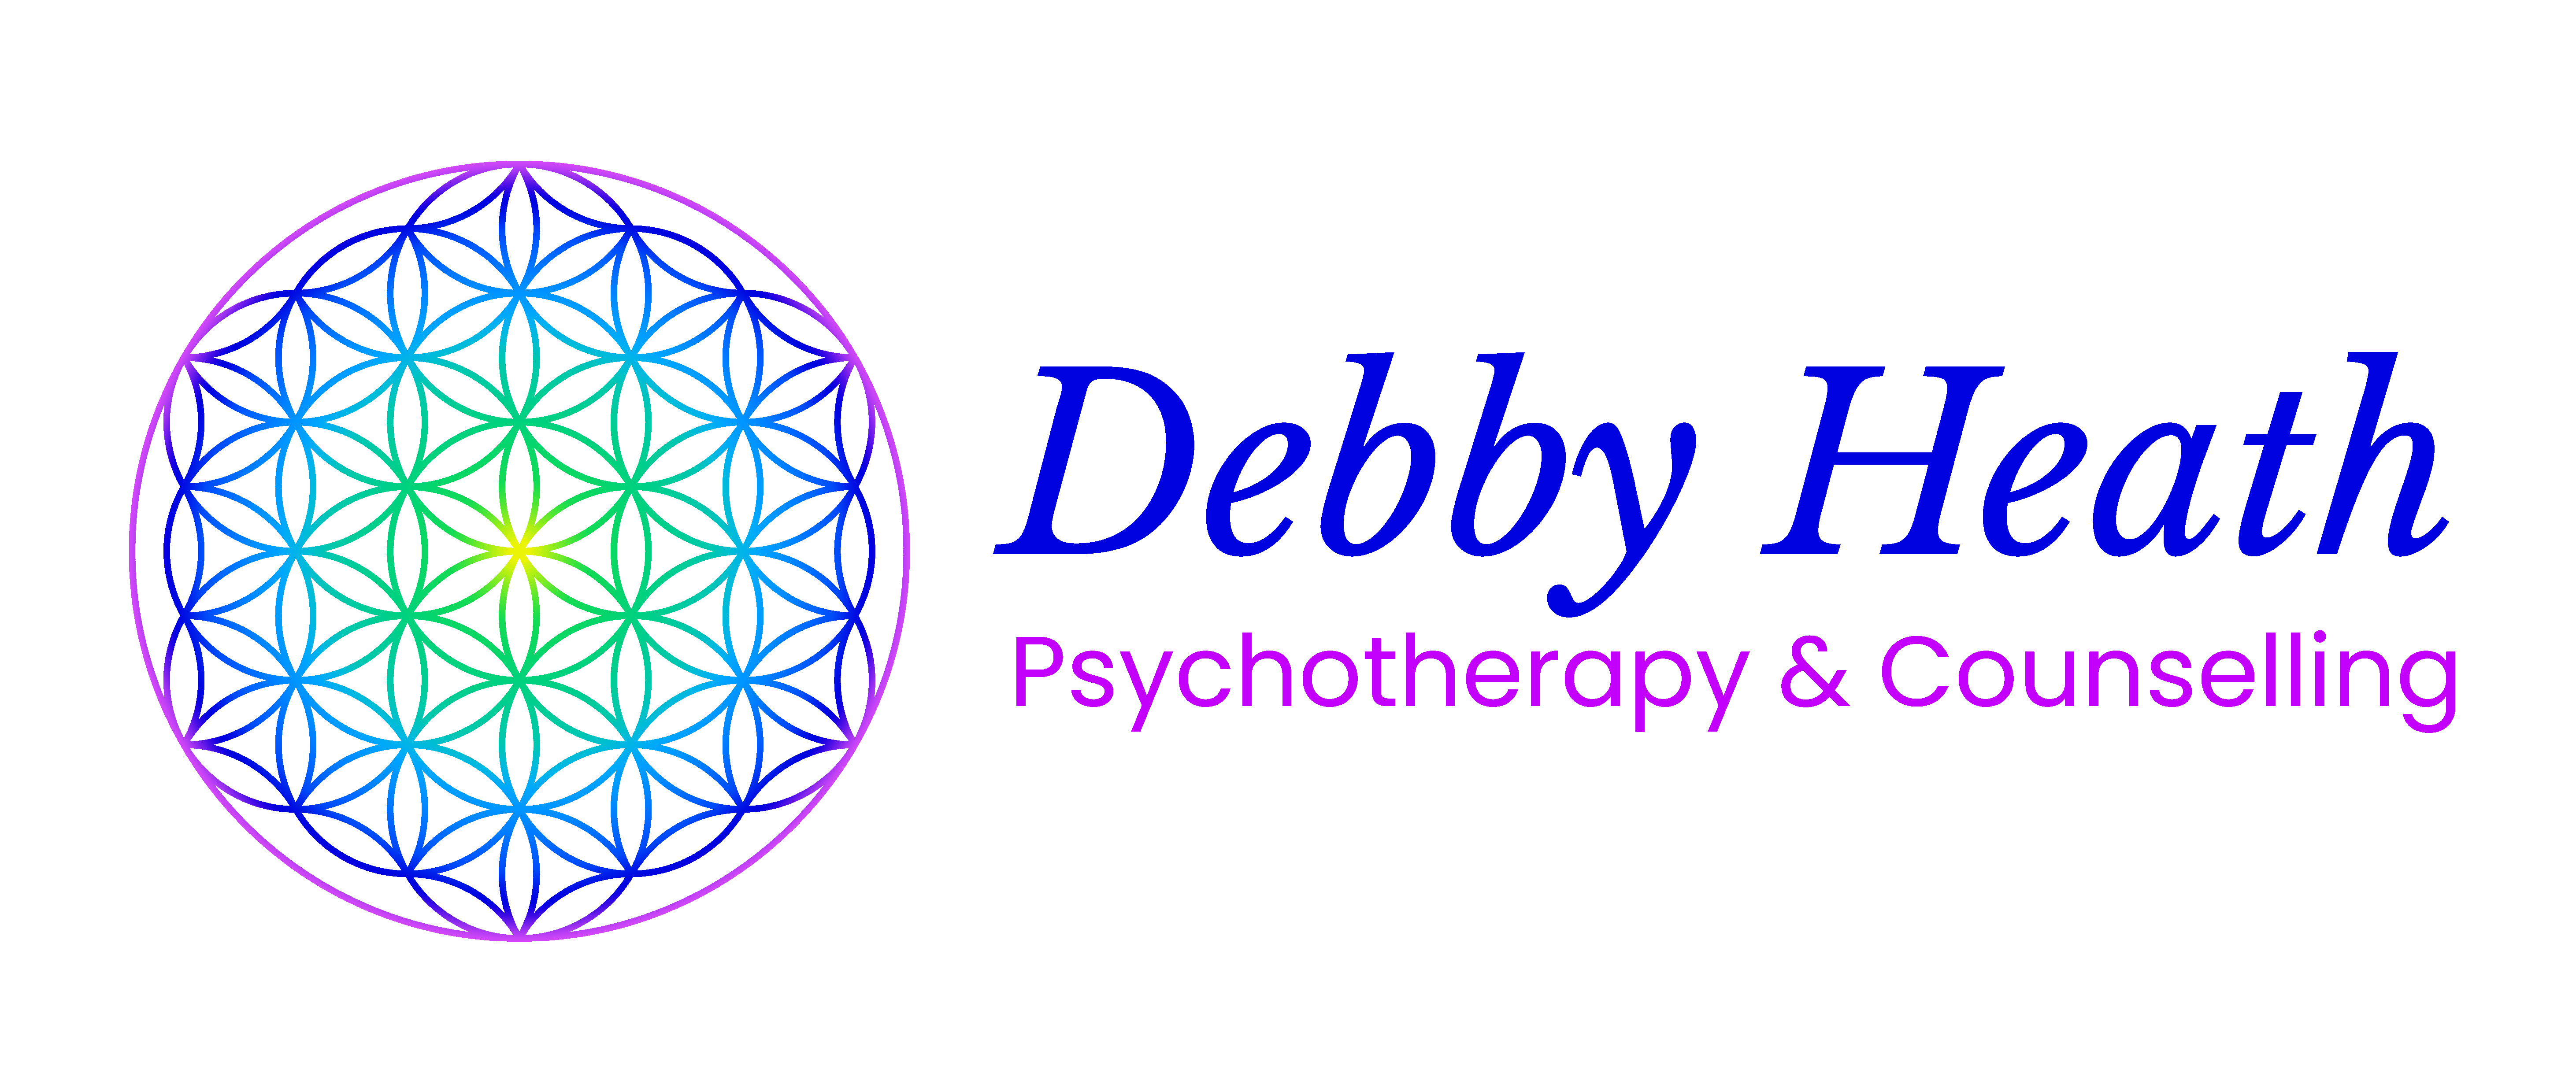 Debby Heath Psychotherapy and Counselling